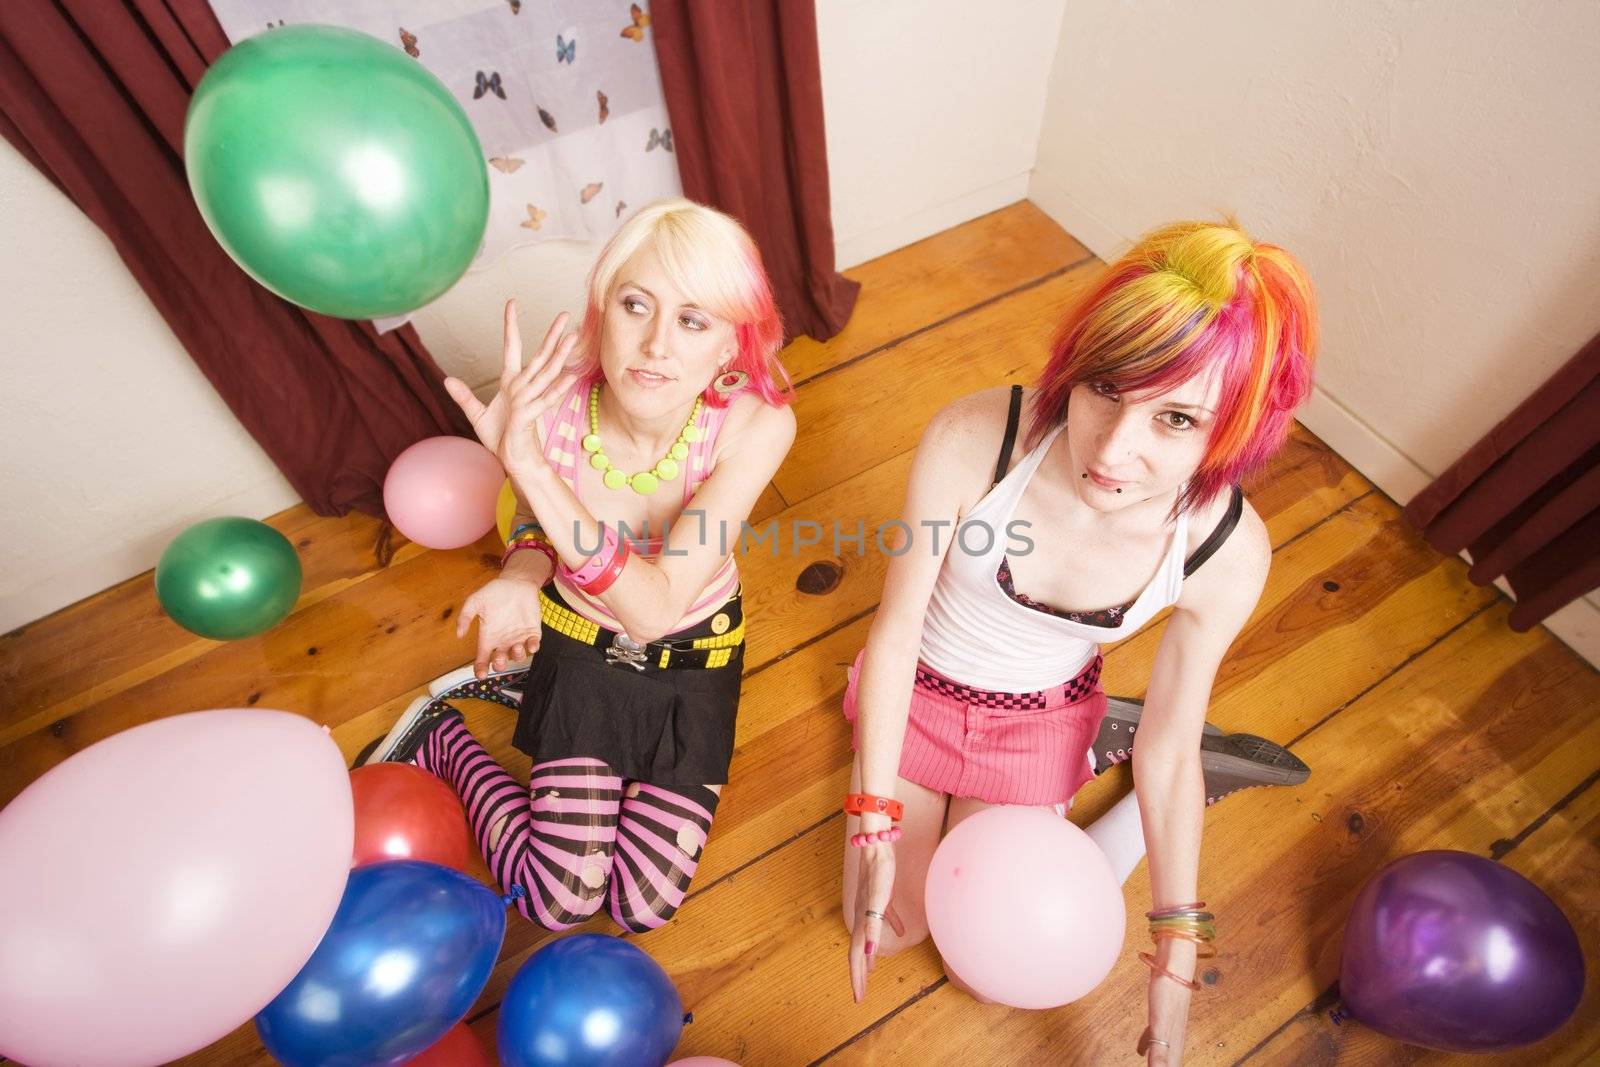 Girls With Balloons by Creatista